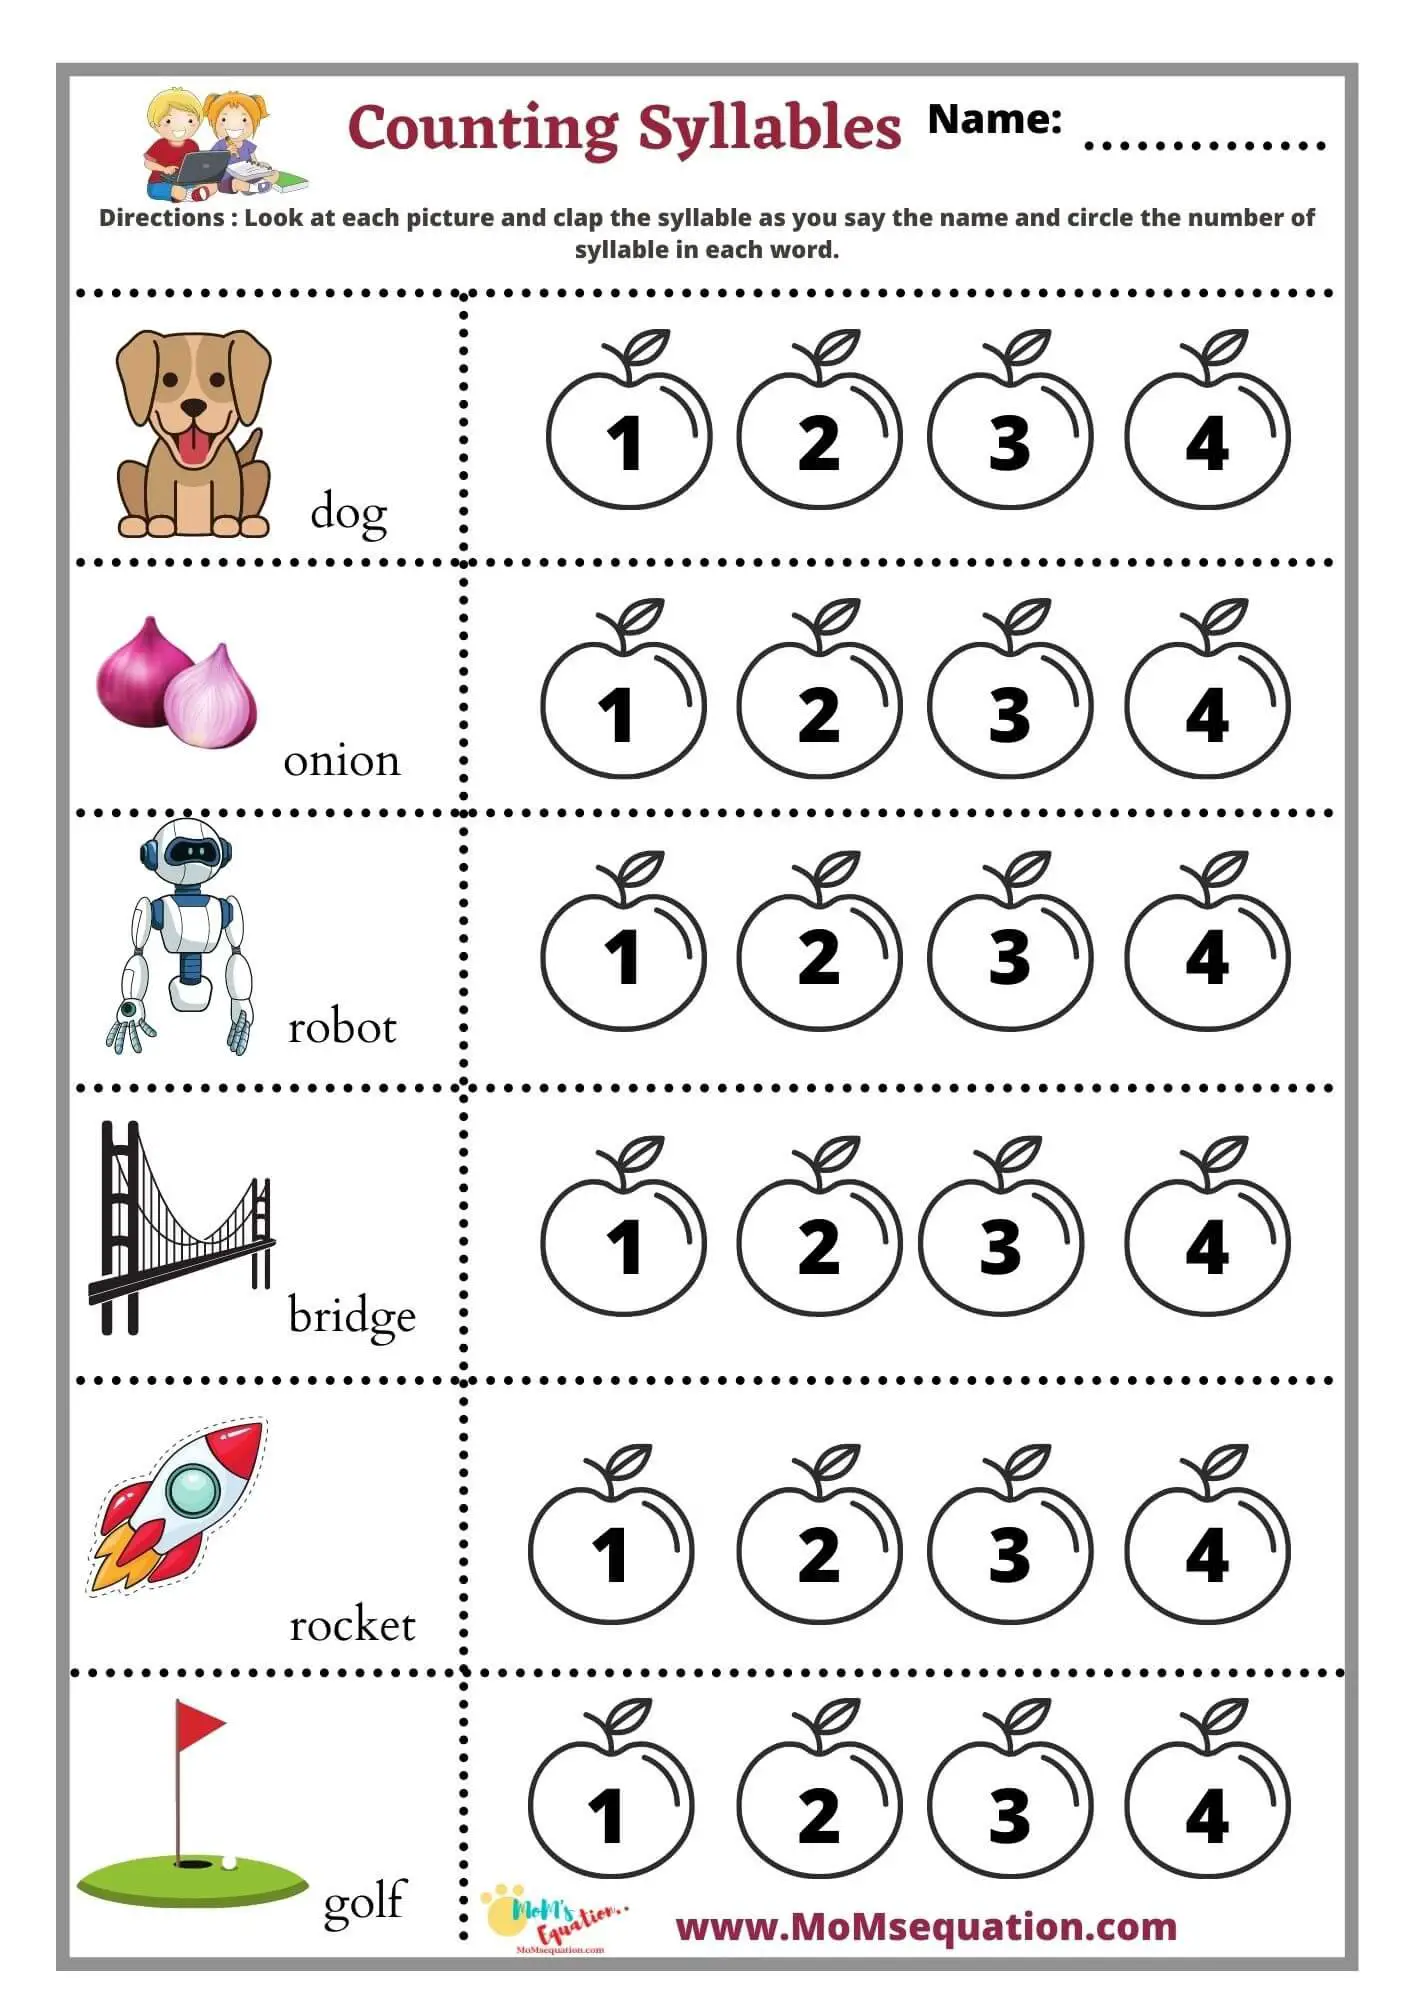 Counting Syllables worksheets-phonics activity free pdf - Mom Throughout Syllables Worksheet For Kindergarten